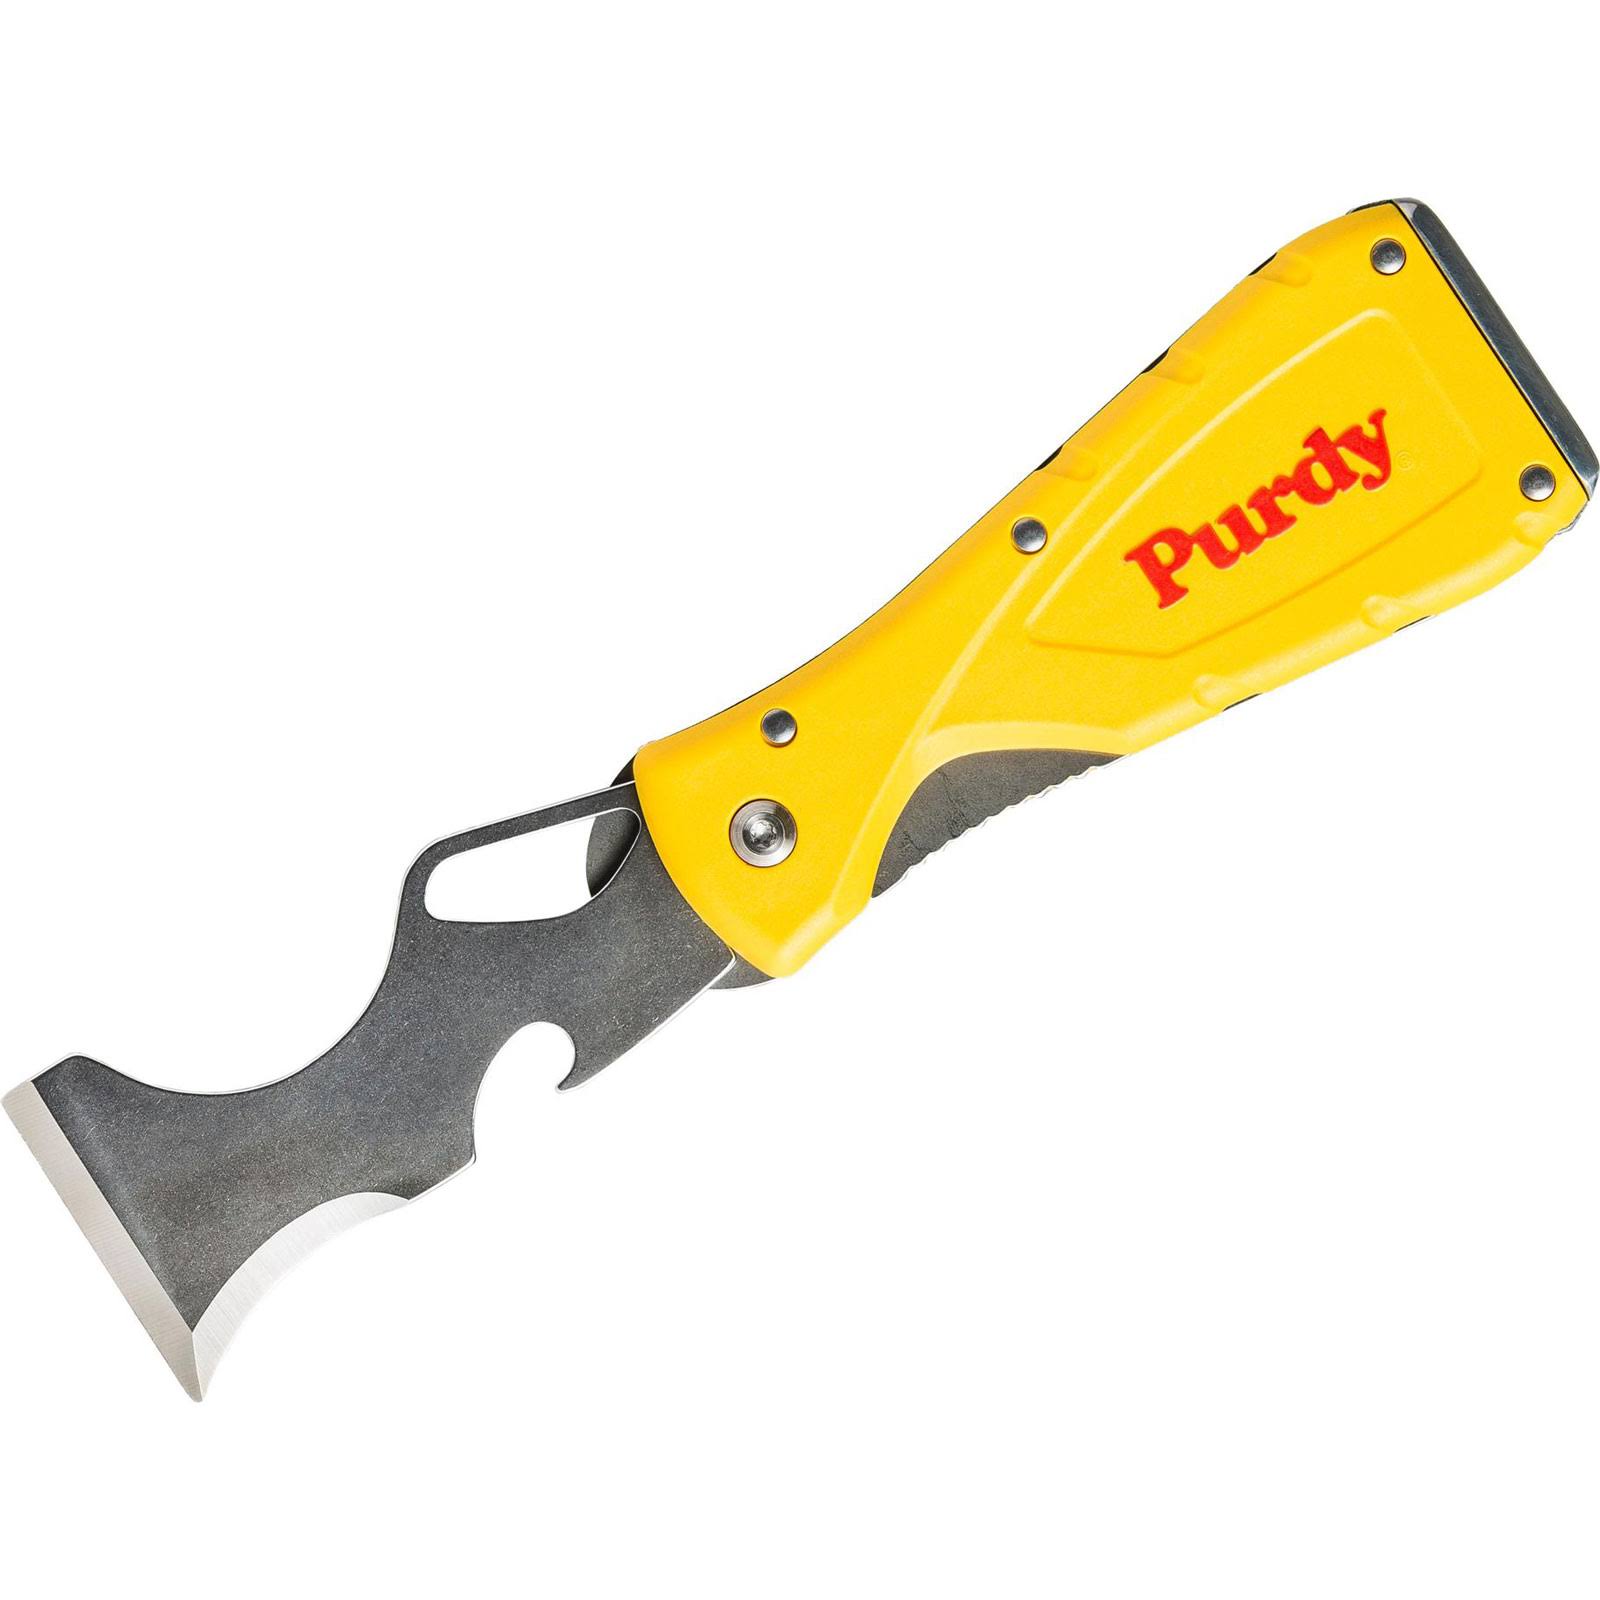 Purdy 140900600 10-in-1 Folding Multi-tool, Rubber/Stainless Steel, Yellow